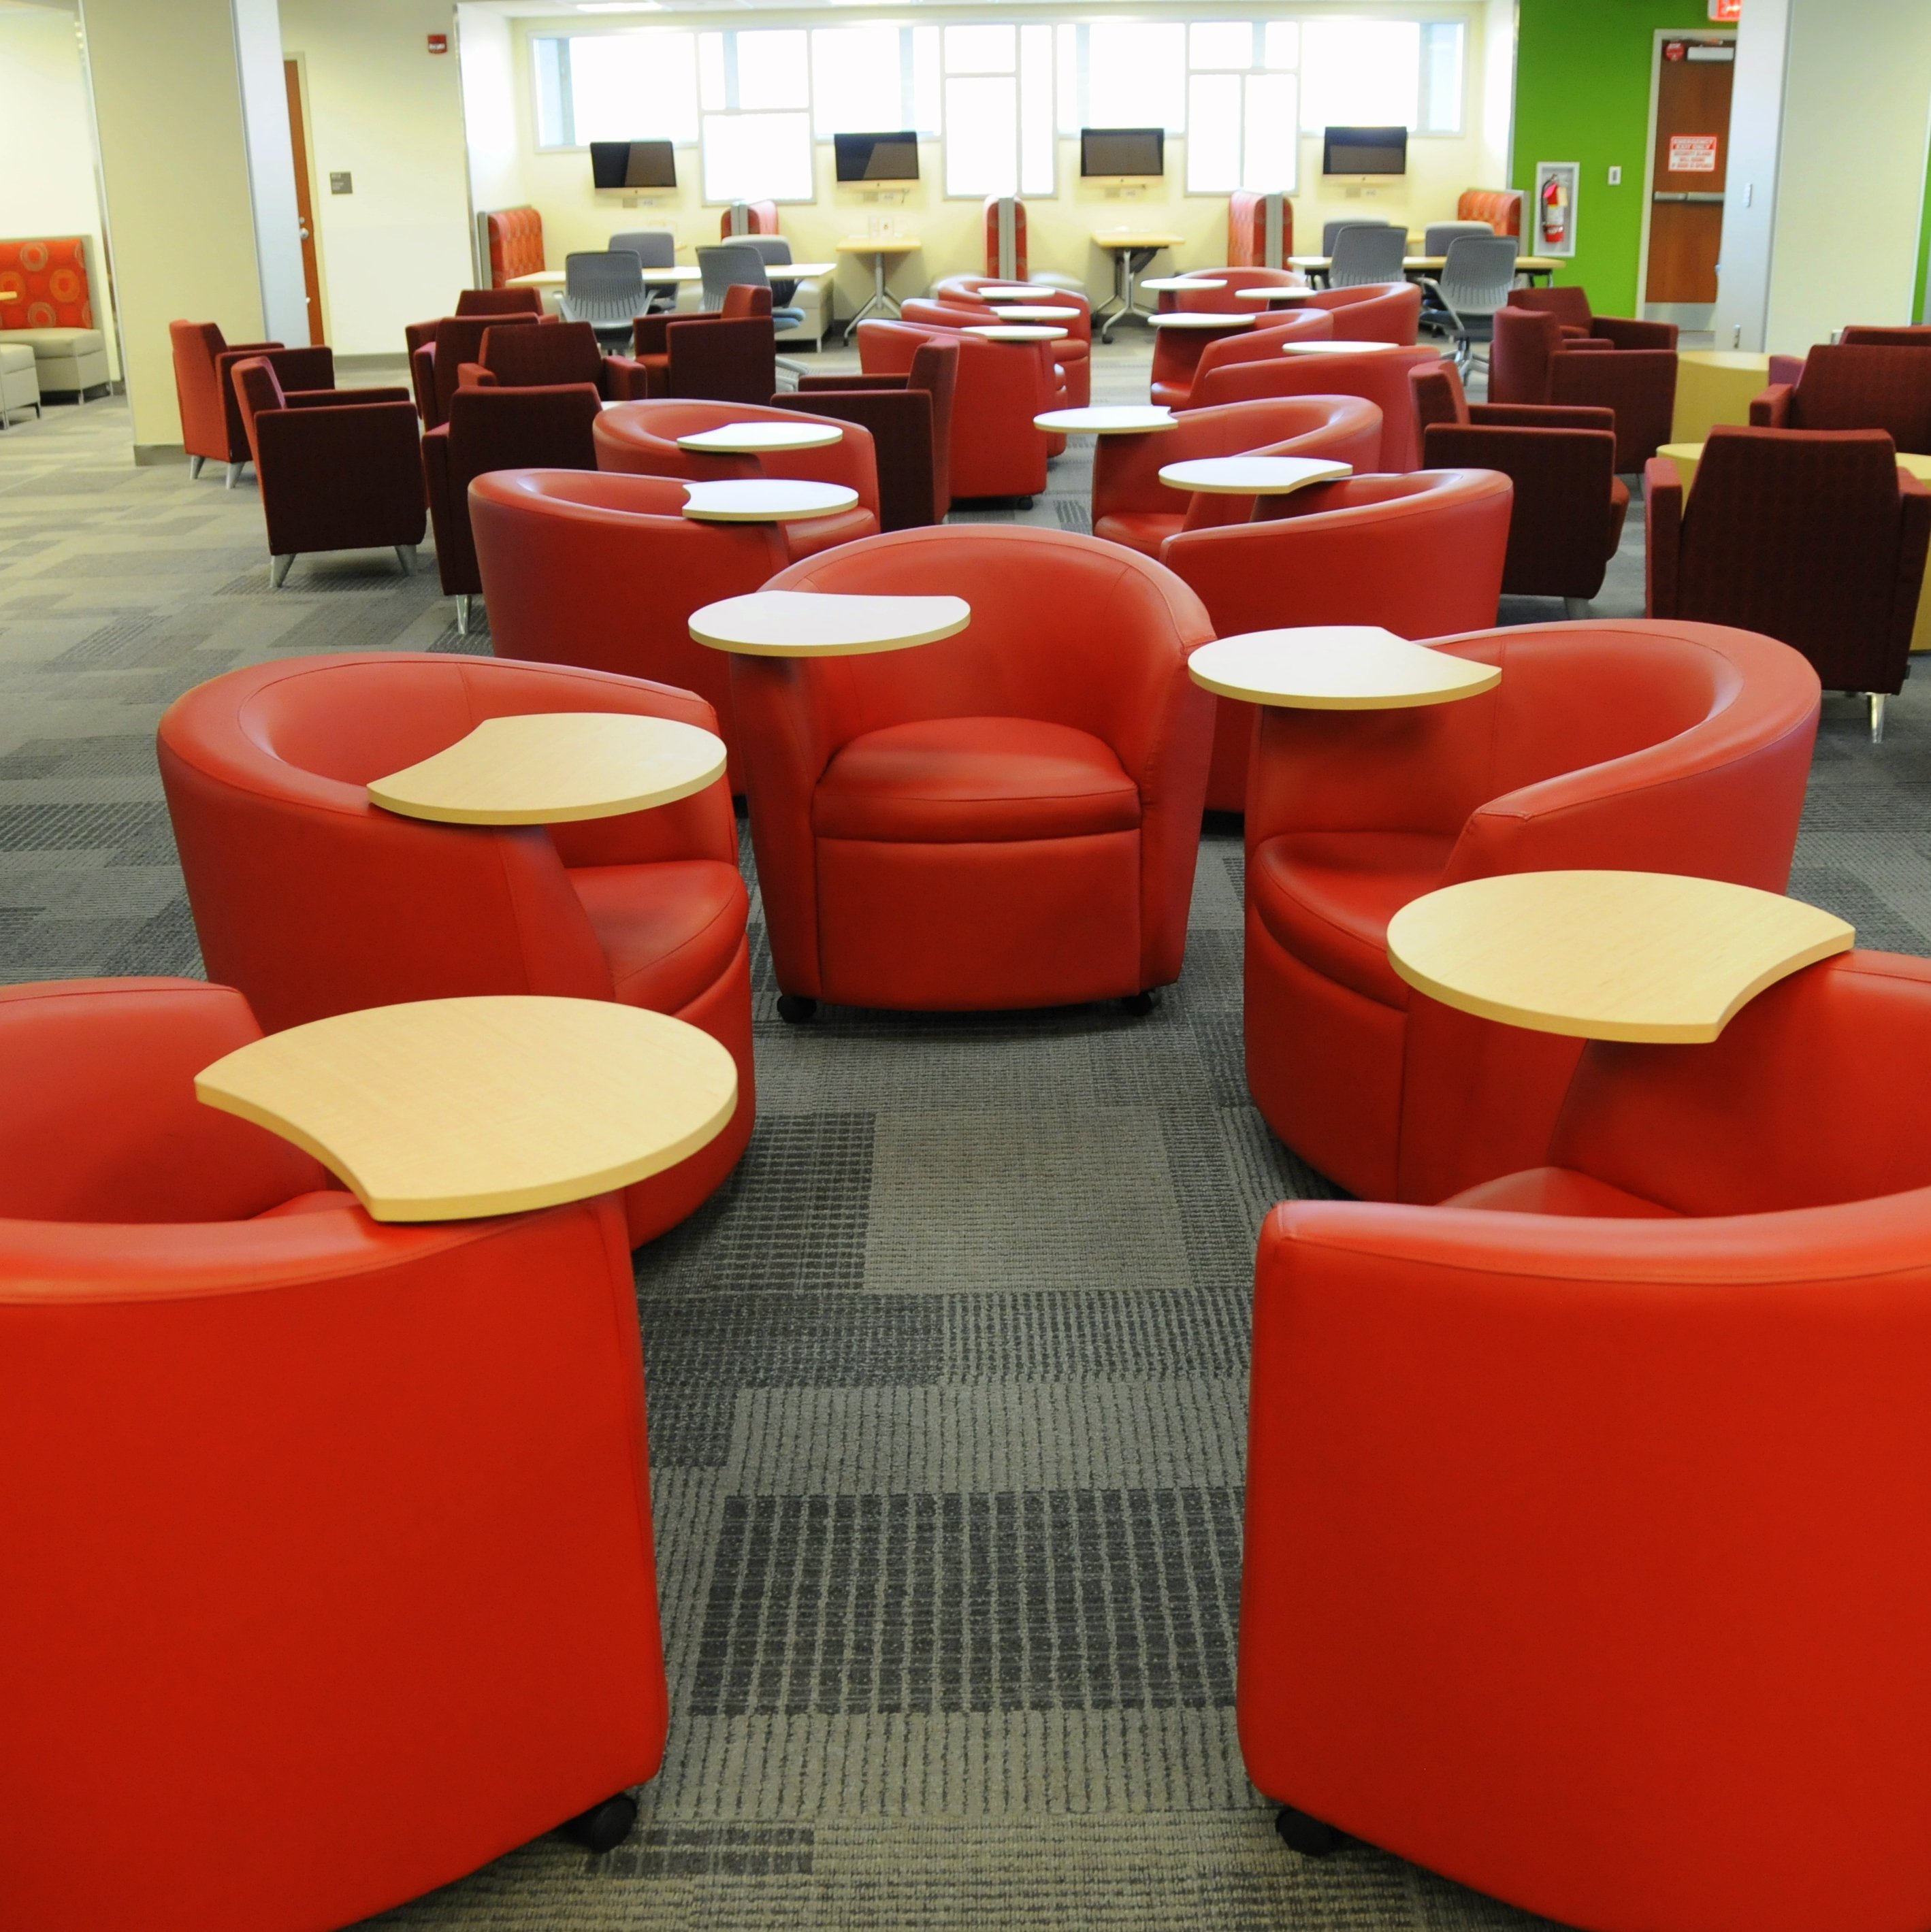 The Learning Commons at Delaware County Community College opened in 2013 and houses Library Services, Tutoring, and Writing Services.